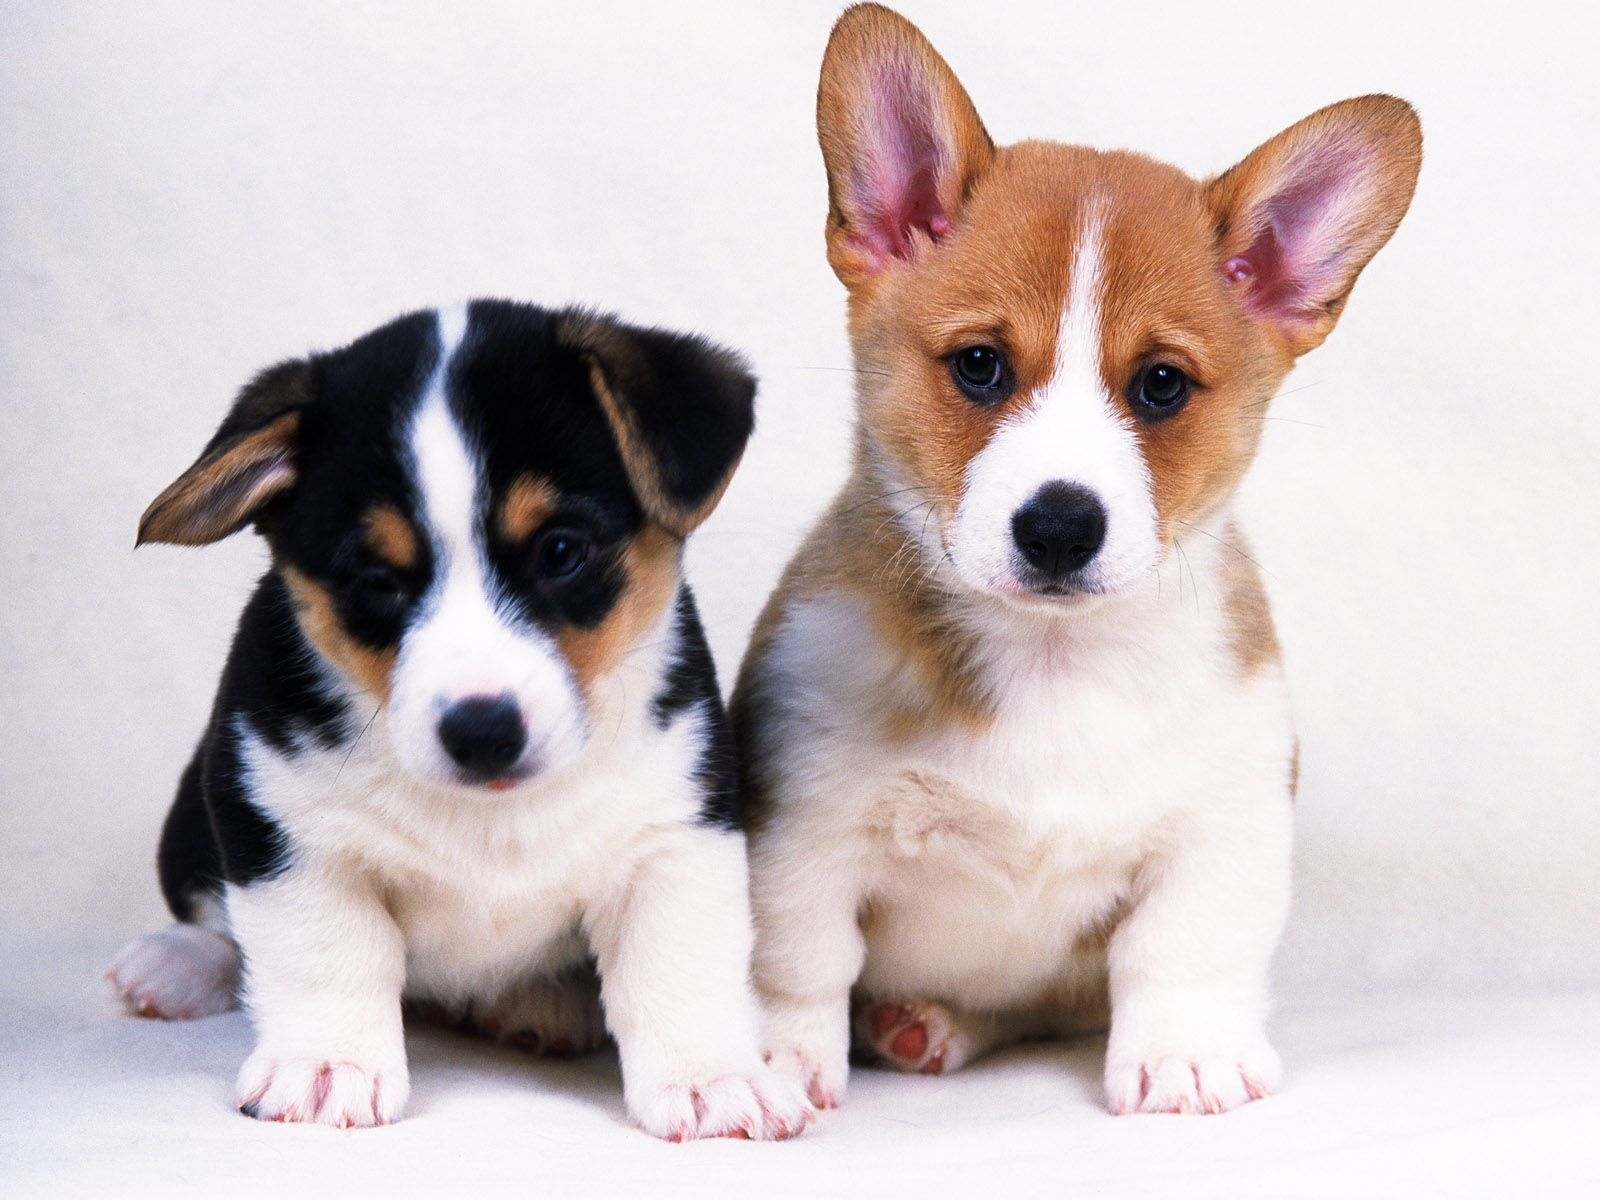 Previous, Animals - Dogs - Two little dogs wallpaper